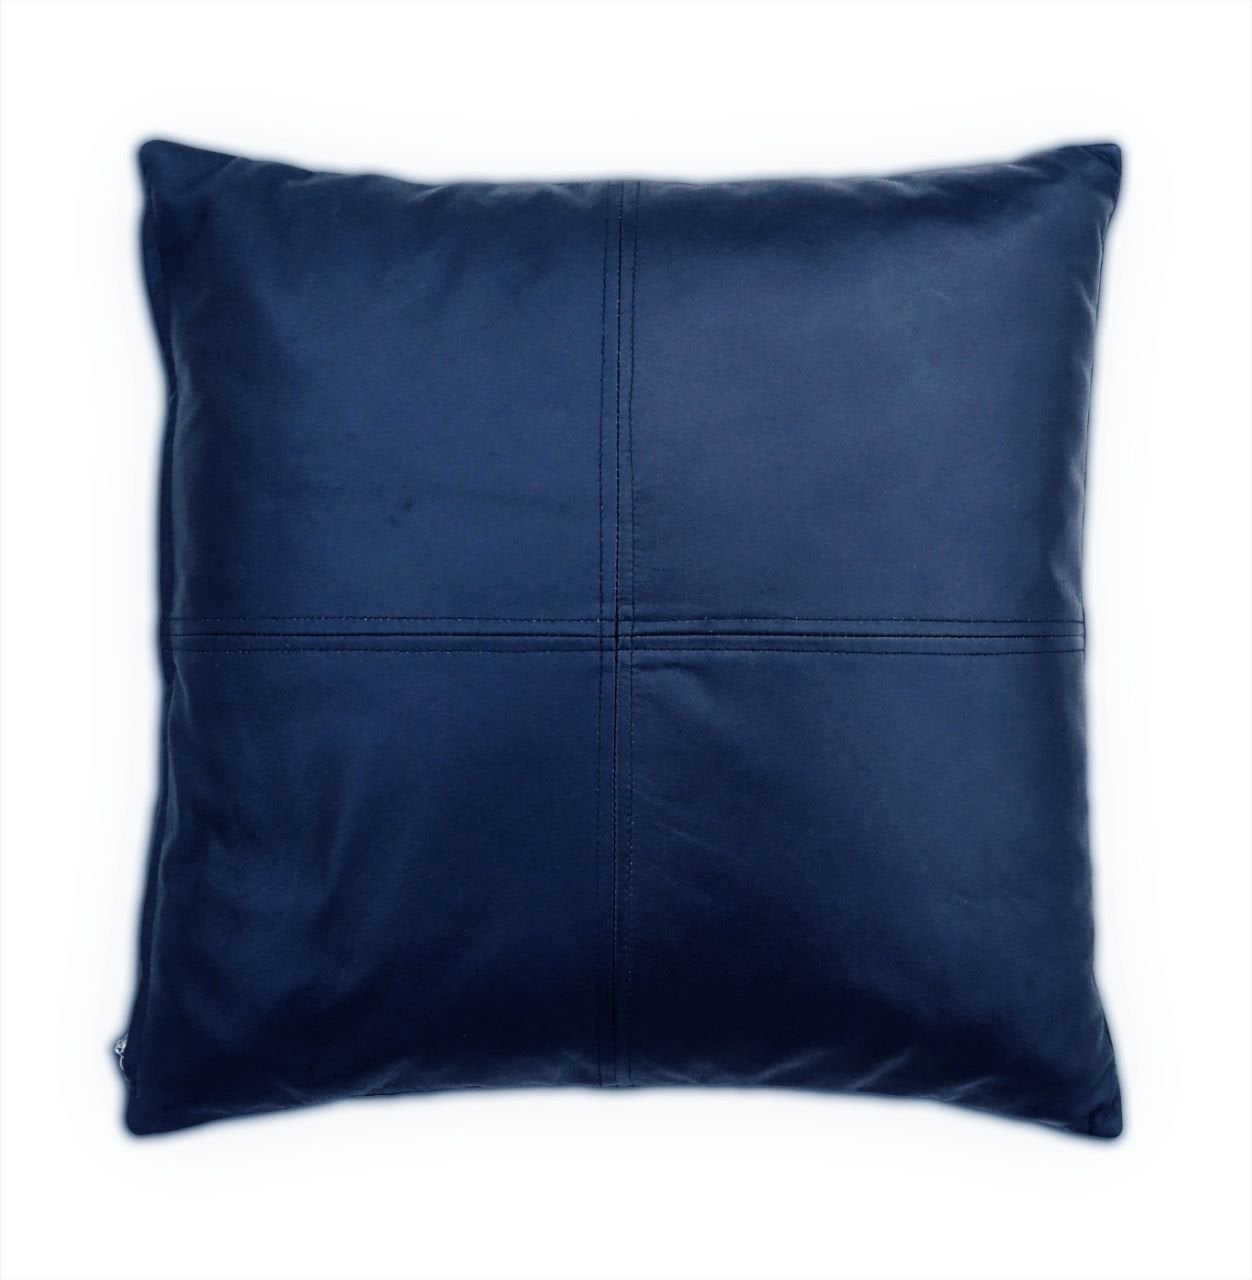 Blue Soft Lamb Leather Comfort Pillow Cushion Cover - SouthBeachLeather